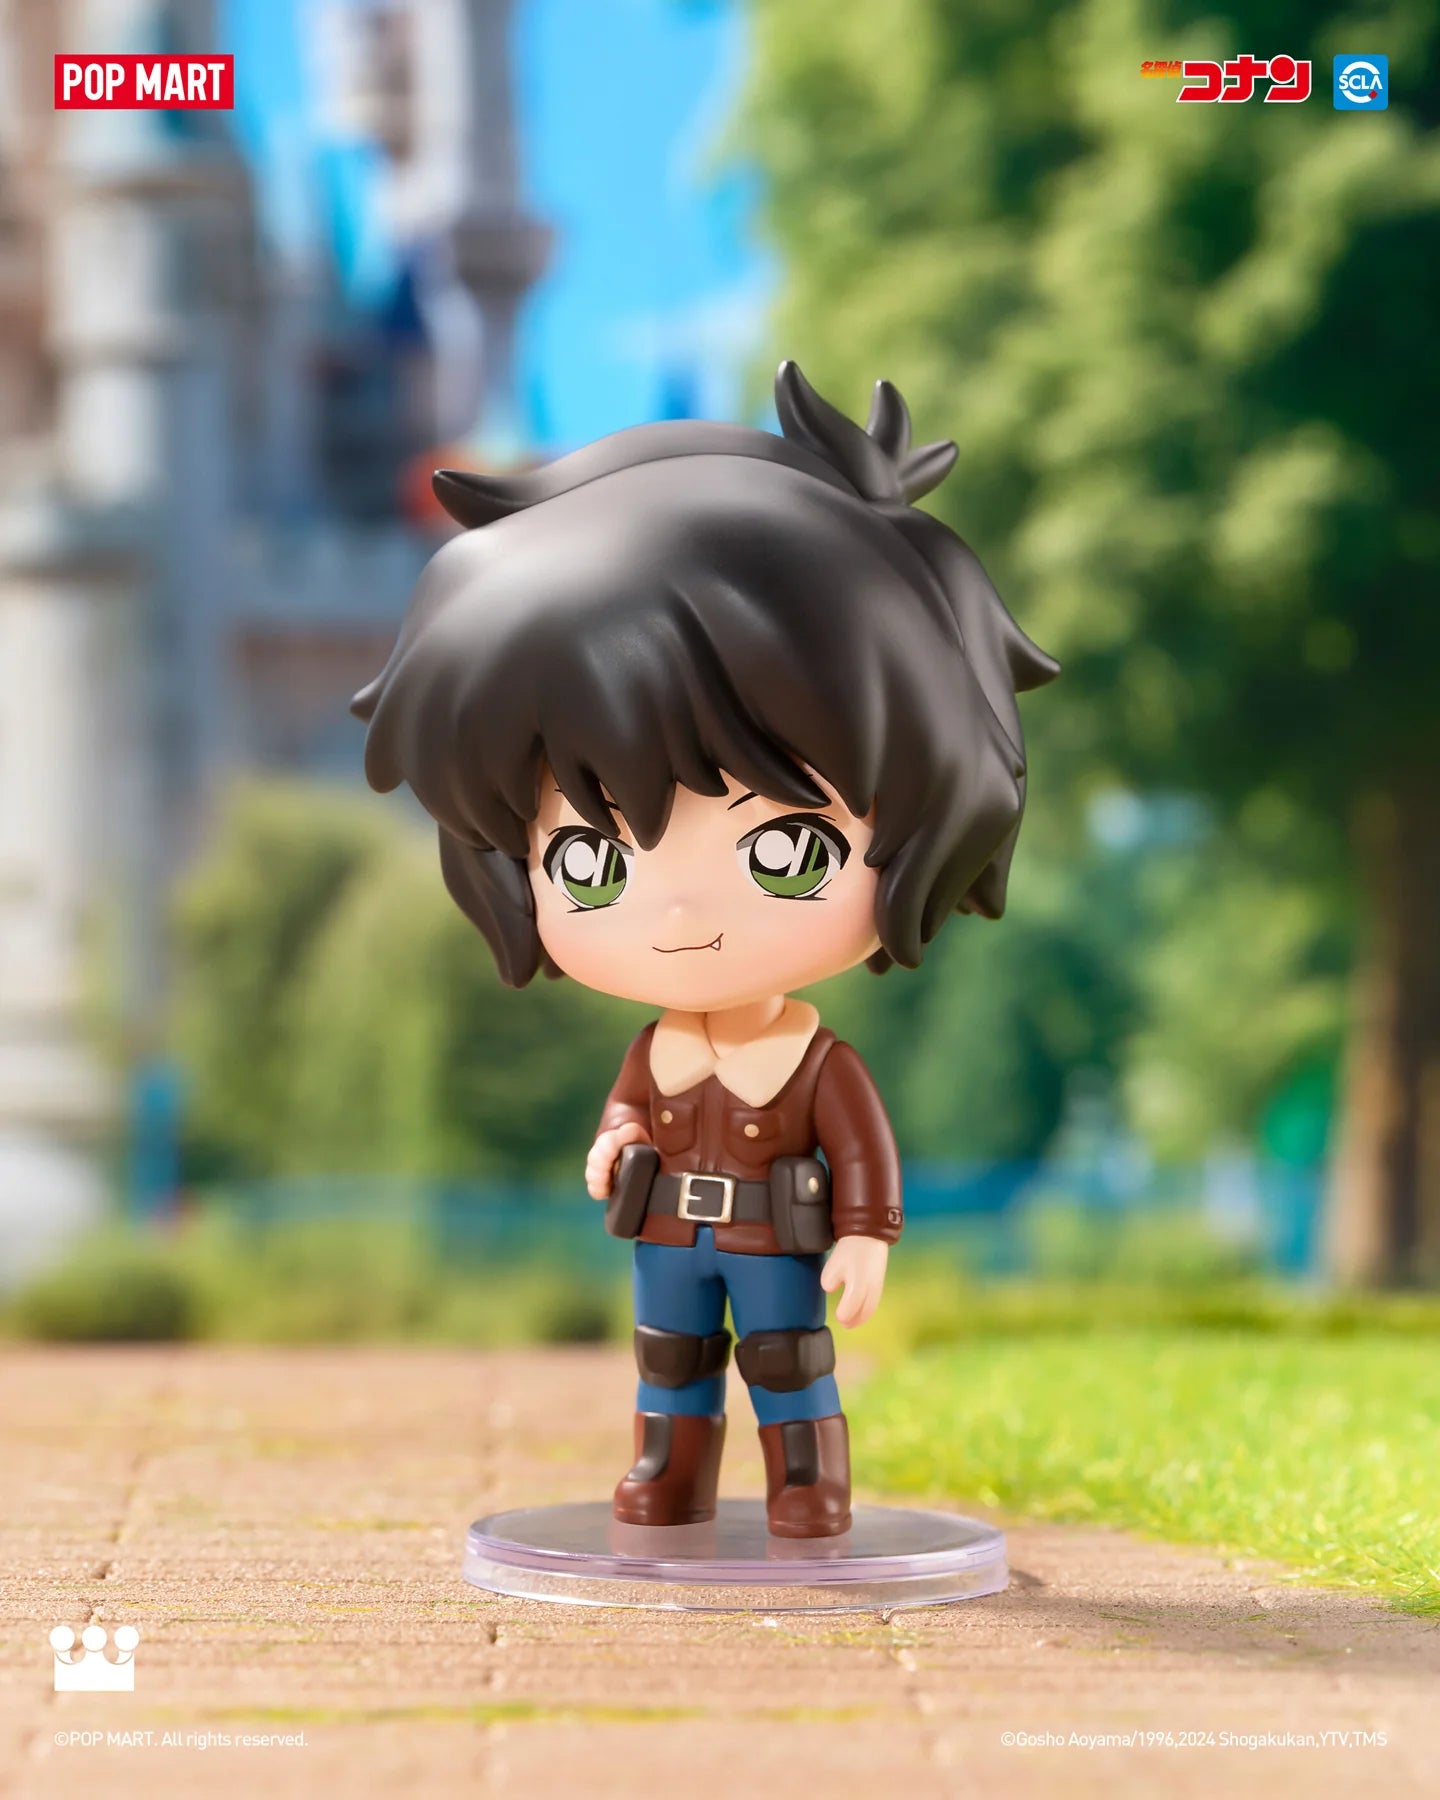 Detective Conan Carnival Blind Box Series: A toy figurine of a cartoon character on a plastic disc.